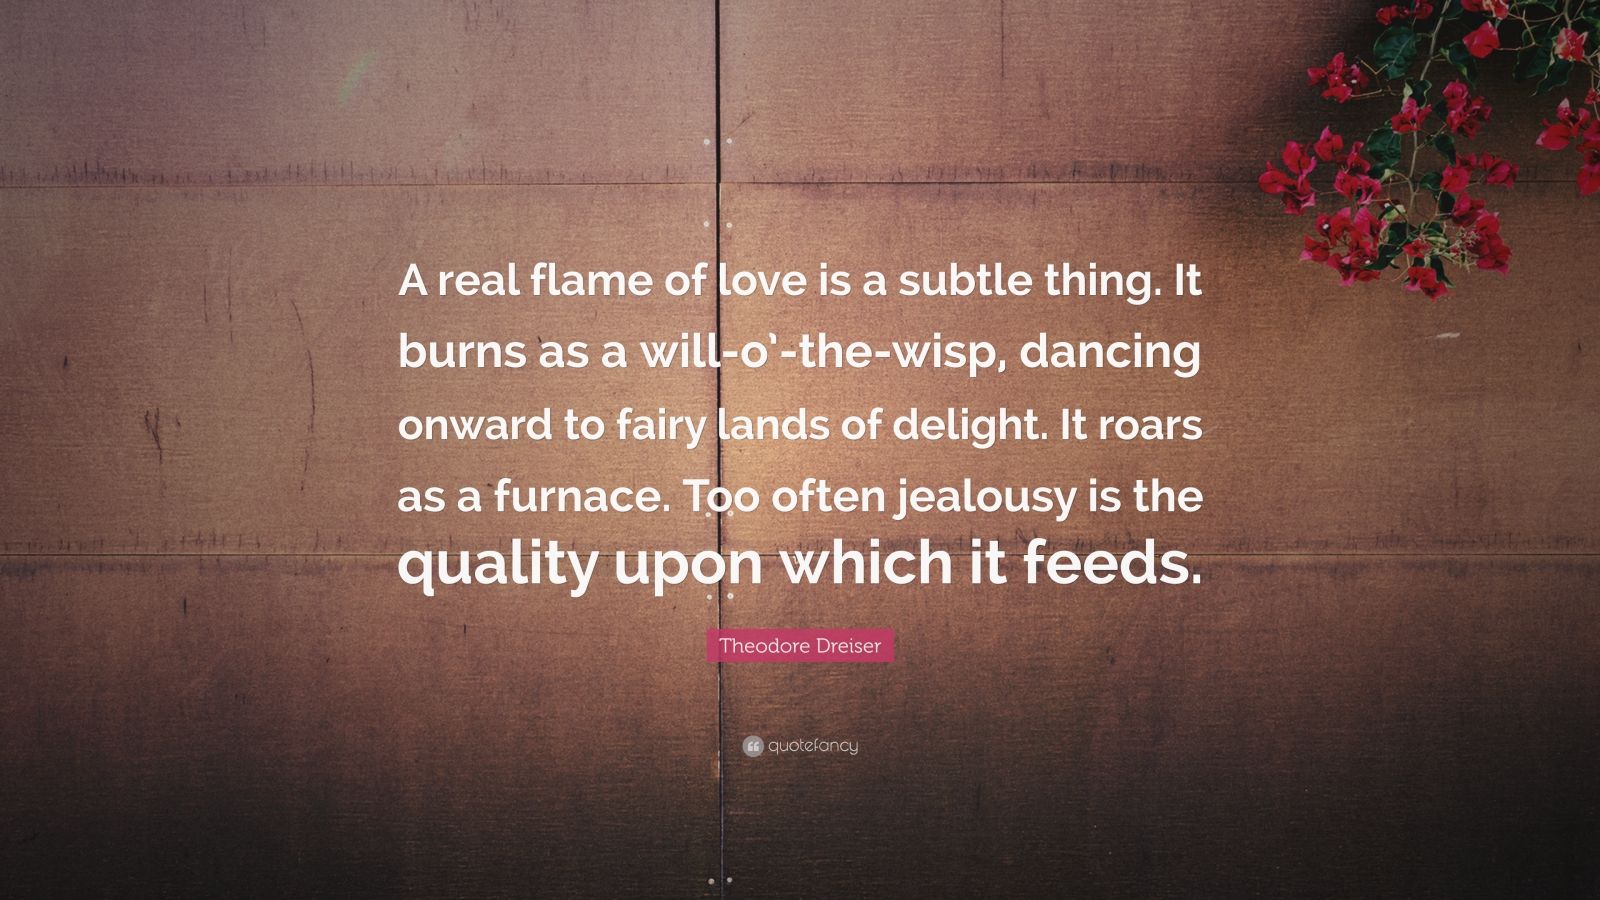 Theodore Dreiser Quote: “A real flame of love is a subtle thing. It burns  as a will-o'-the-wisp, dancing onward to fairy lands of delight. It roa”